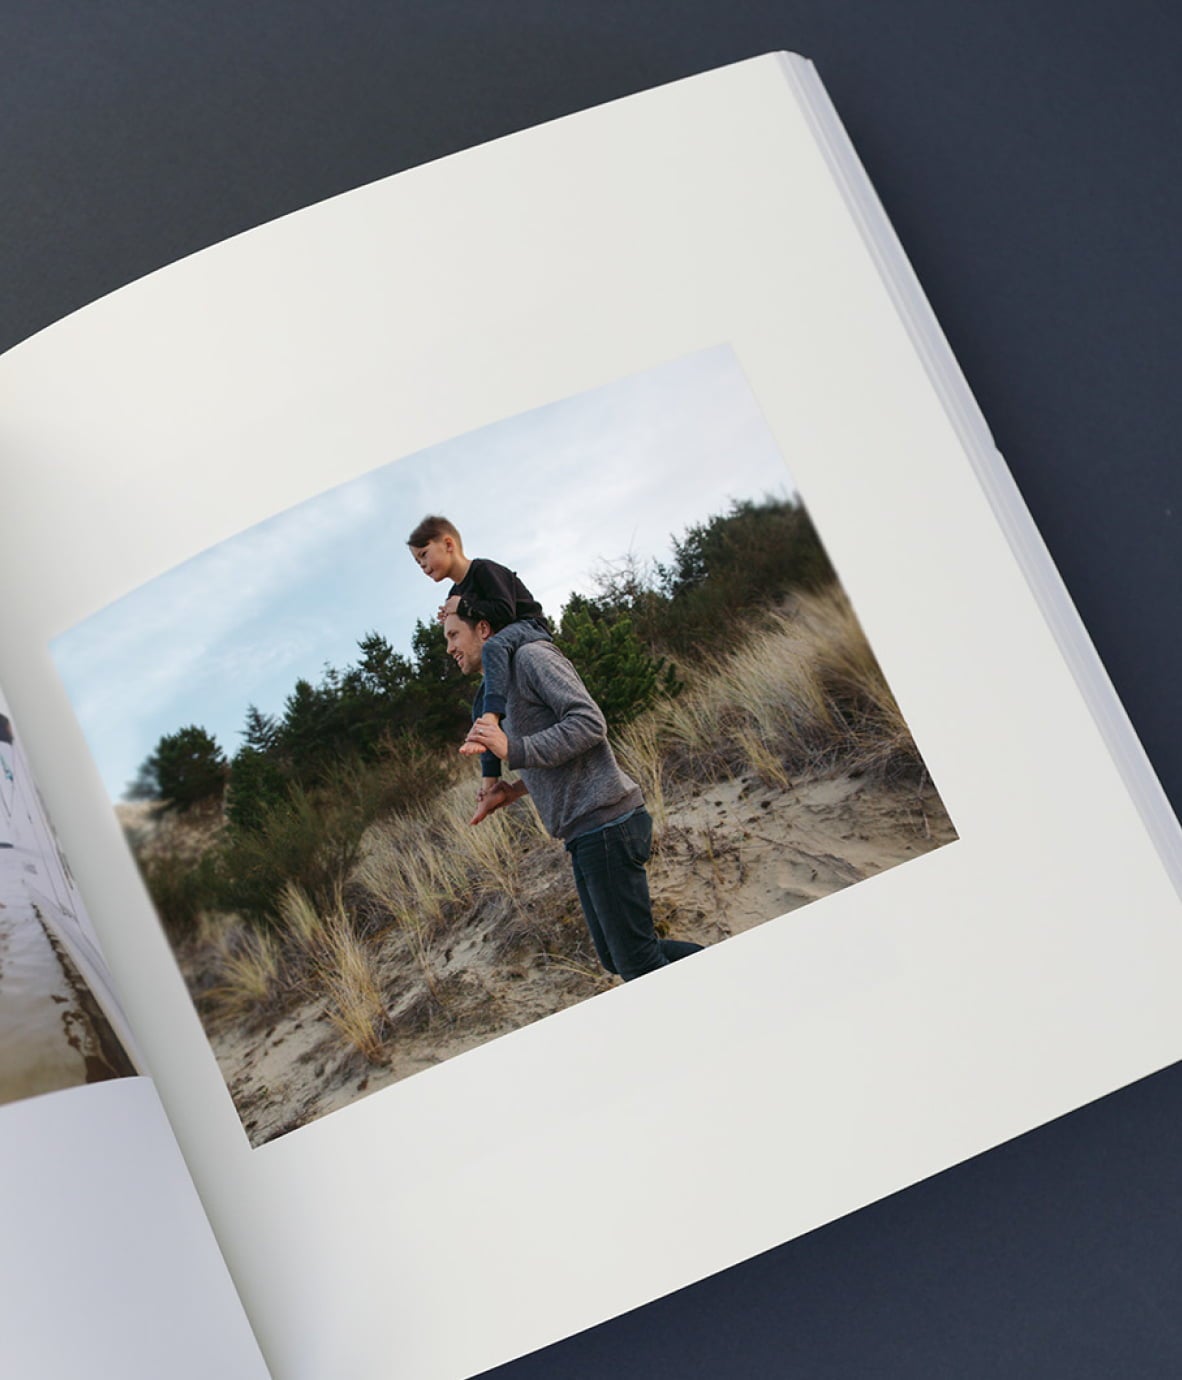 Softcover photo book showcasing horizontal image layout and photo of father with child on his shoulders